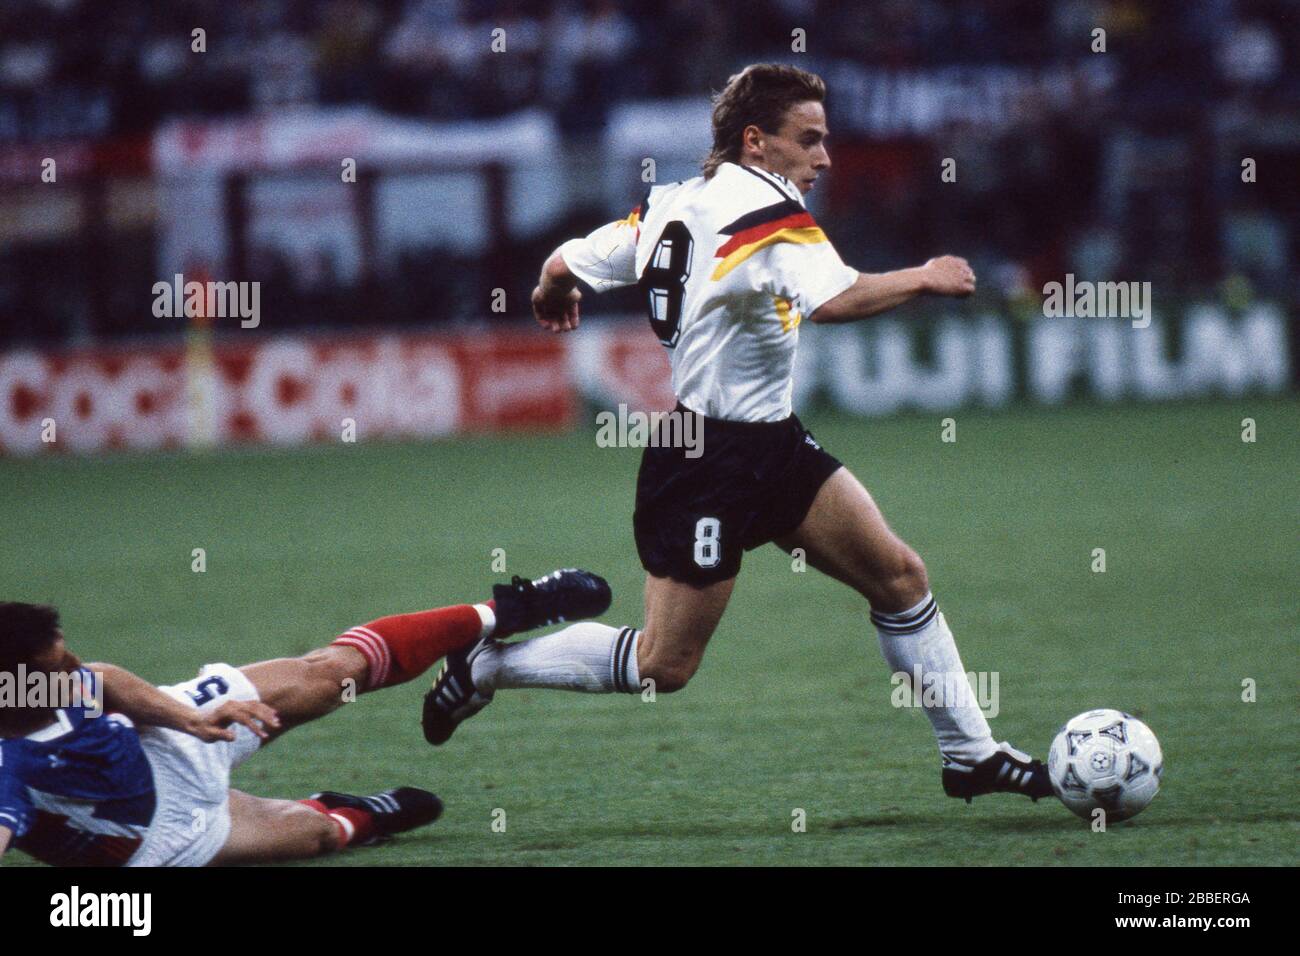 Thomas HAESSLER, Germany, right, pursued in duels versus Faruk HADZIBEGIC (Yugoslavia), duels, action, Germany GER BRD - Yugoslavia YUG 4: 1 (2: 0), preliminary round, final round 1st matchday, group D, 06/19/1990 in Milan, Football World Cup 1990 in Italy, 1989, | usage worldwide Stock Photo